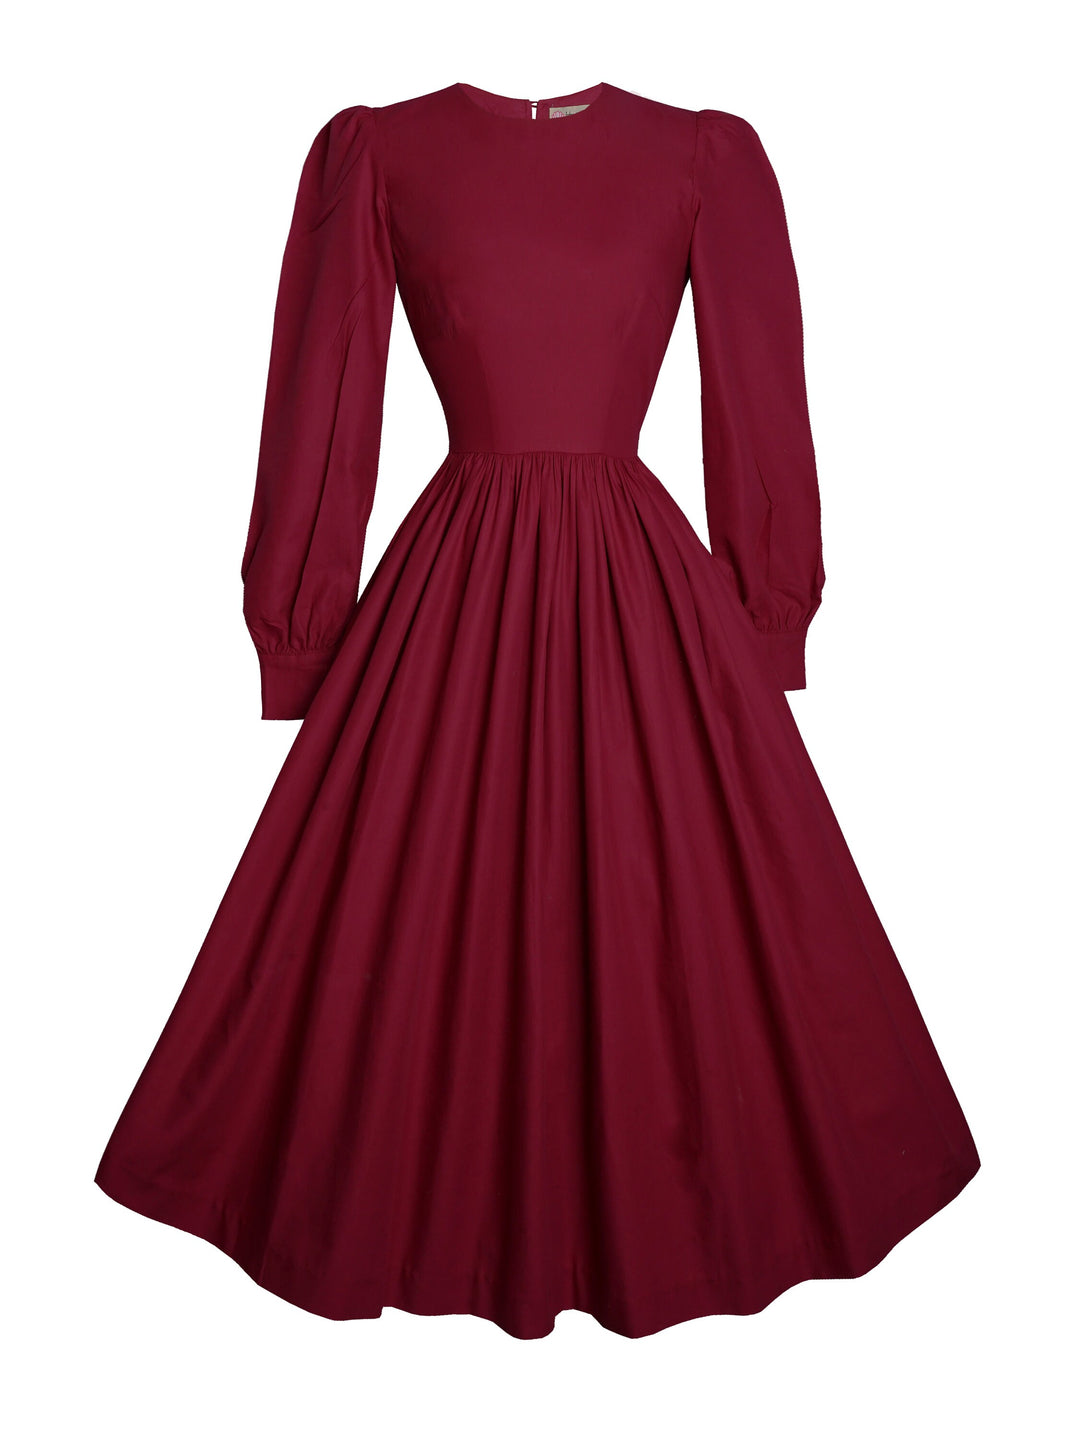 RTS - Size S - Agnes Dress in Burgundy Cotton